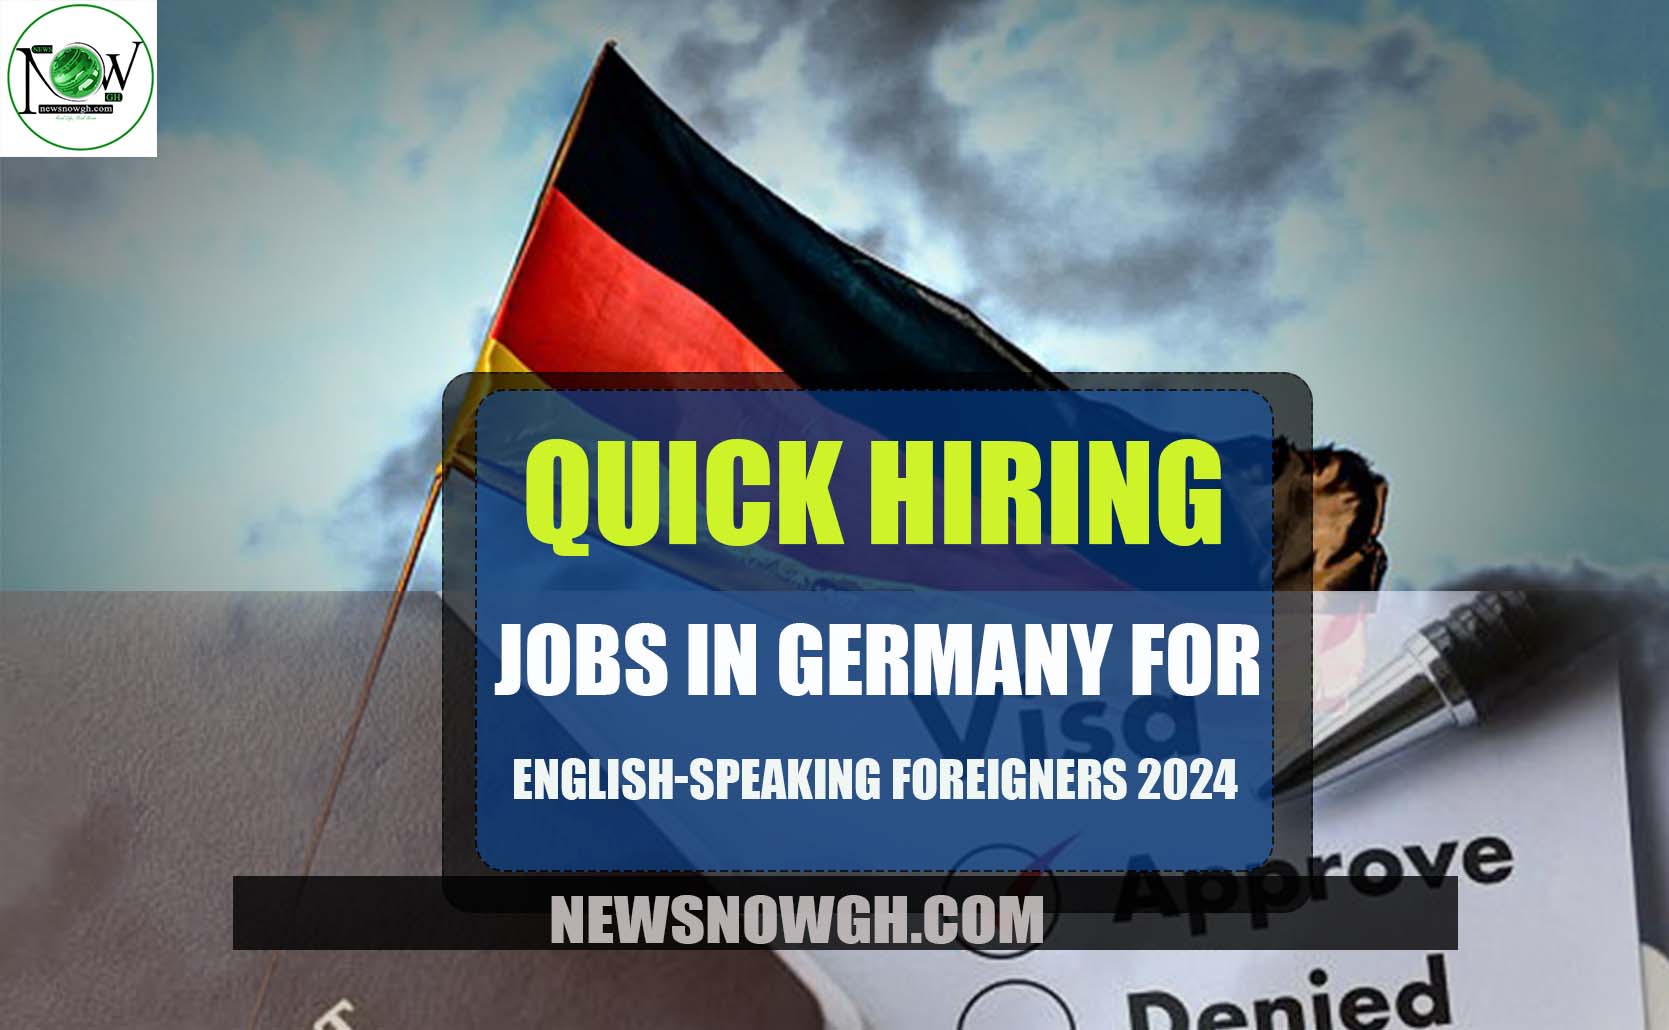 Jobs in Germany for EnglishSpeaking Foreigners 2024